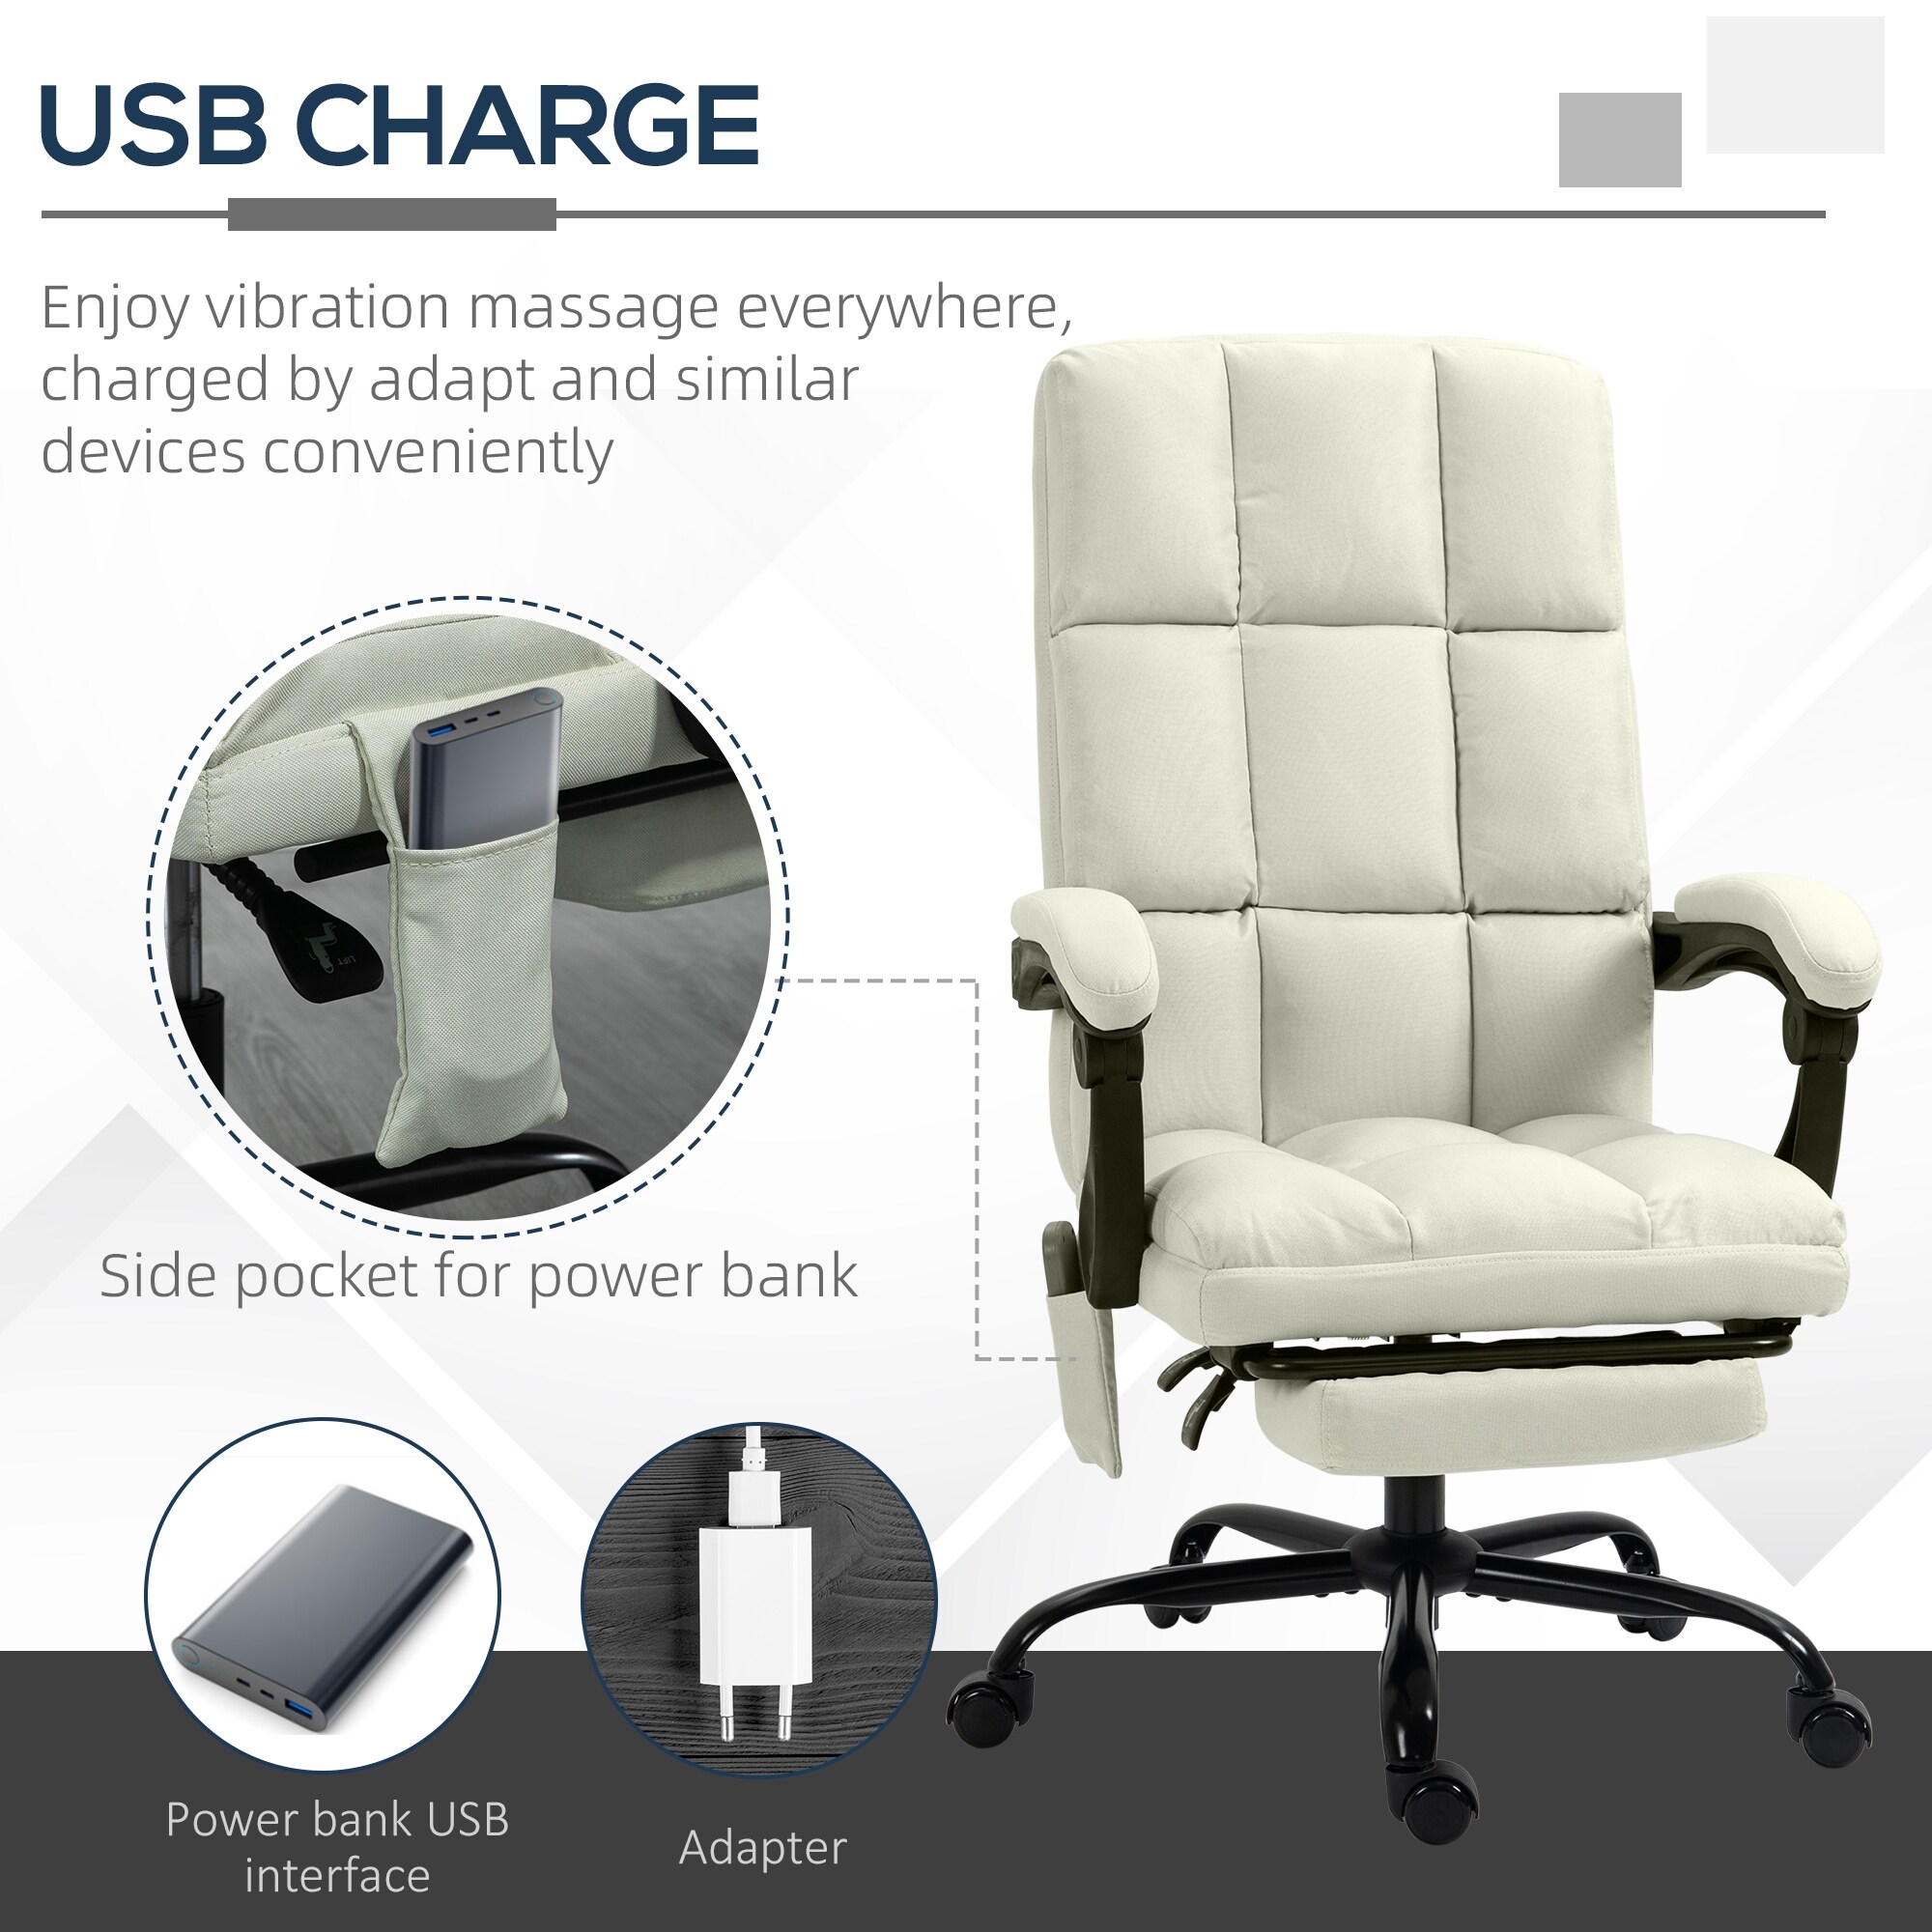 https://ak1.ostkcdn.com/images/products/is/images/direct/cee27a3fa4846e1d886e8ddd705712928a4b98fc/Vinsetto-High-Back-Vibration-Massaging-Office-Chair%2C-Reclining-Office-Chair-with-USB-Port%2C-Remote-Control-and-Footrest.jpg